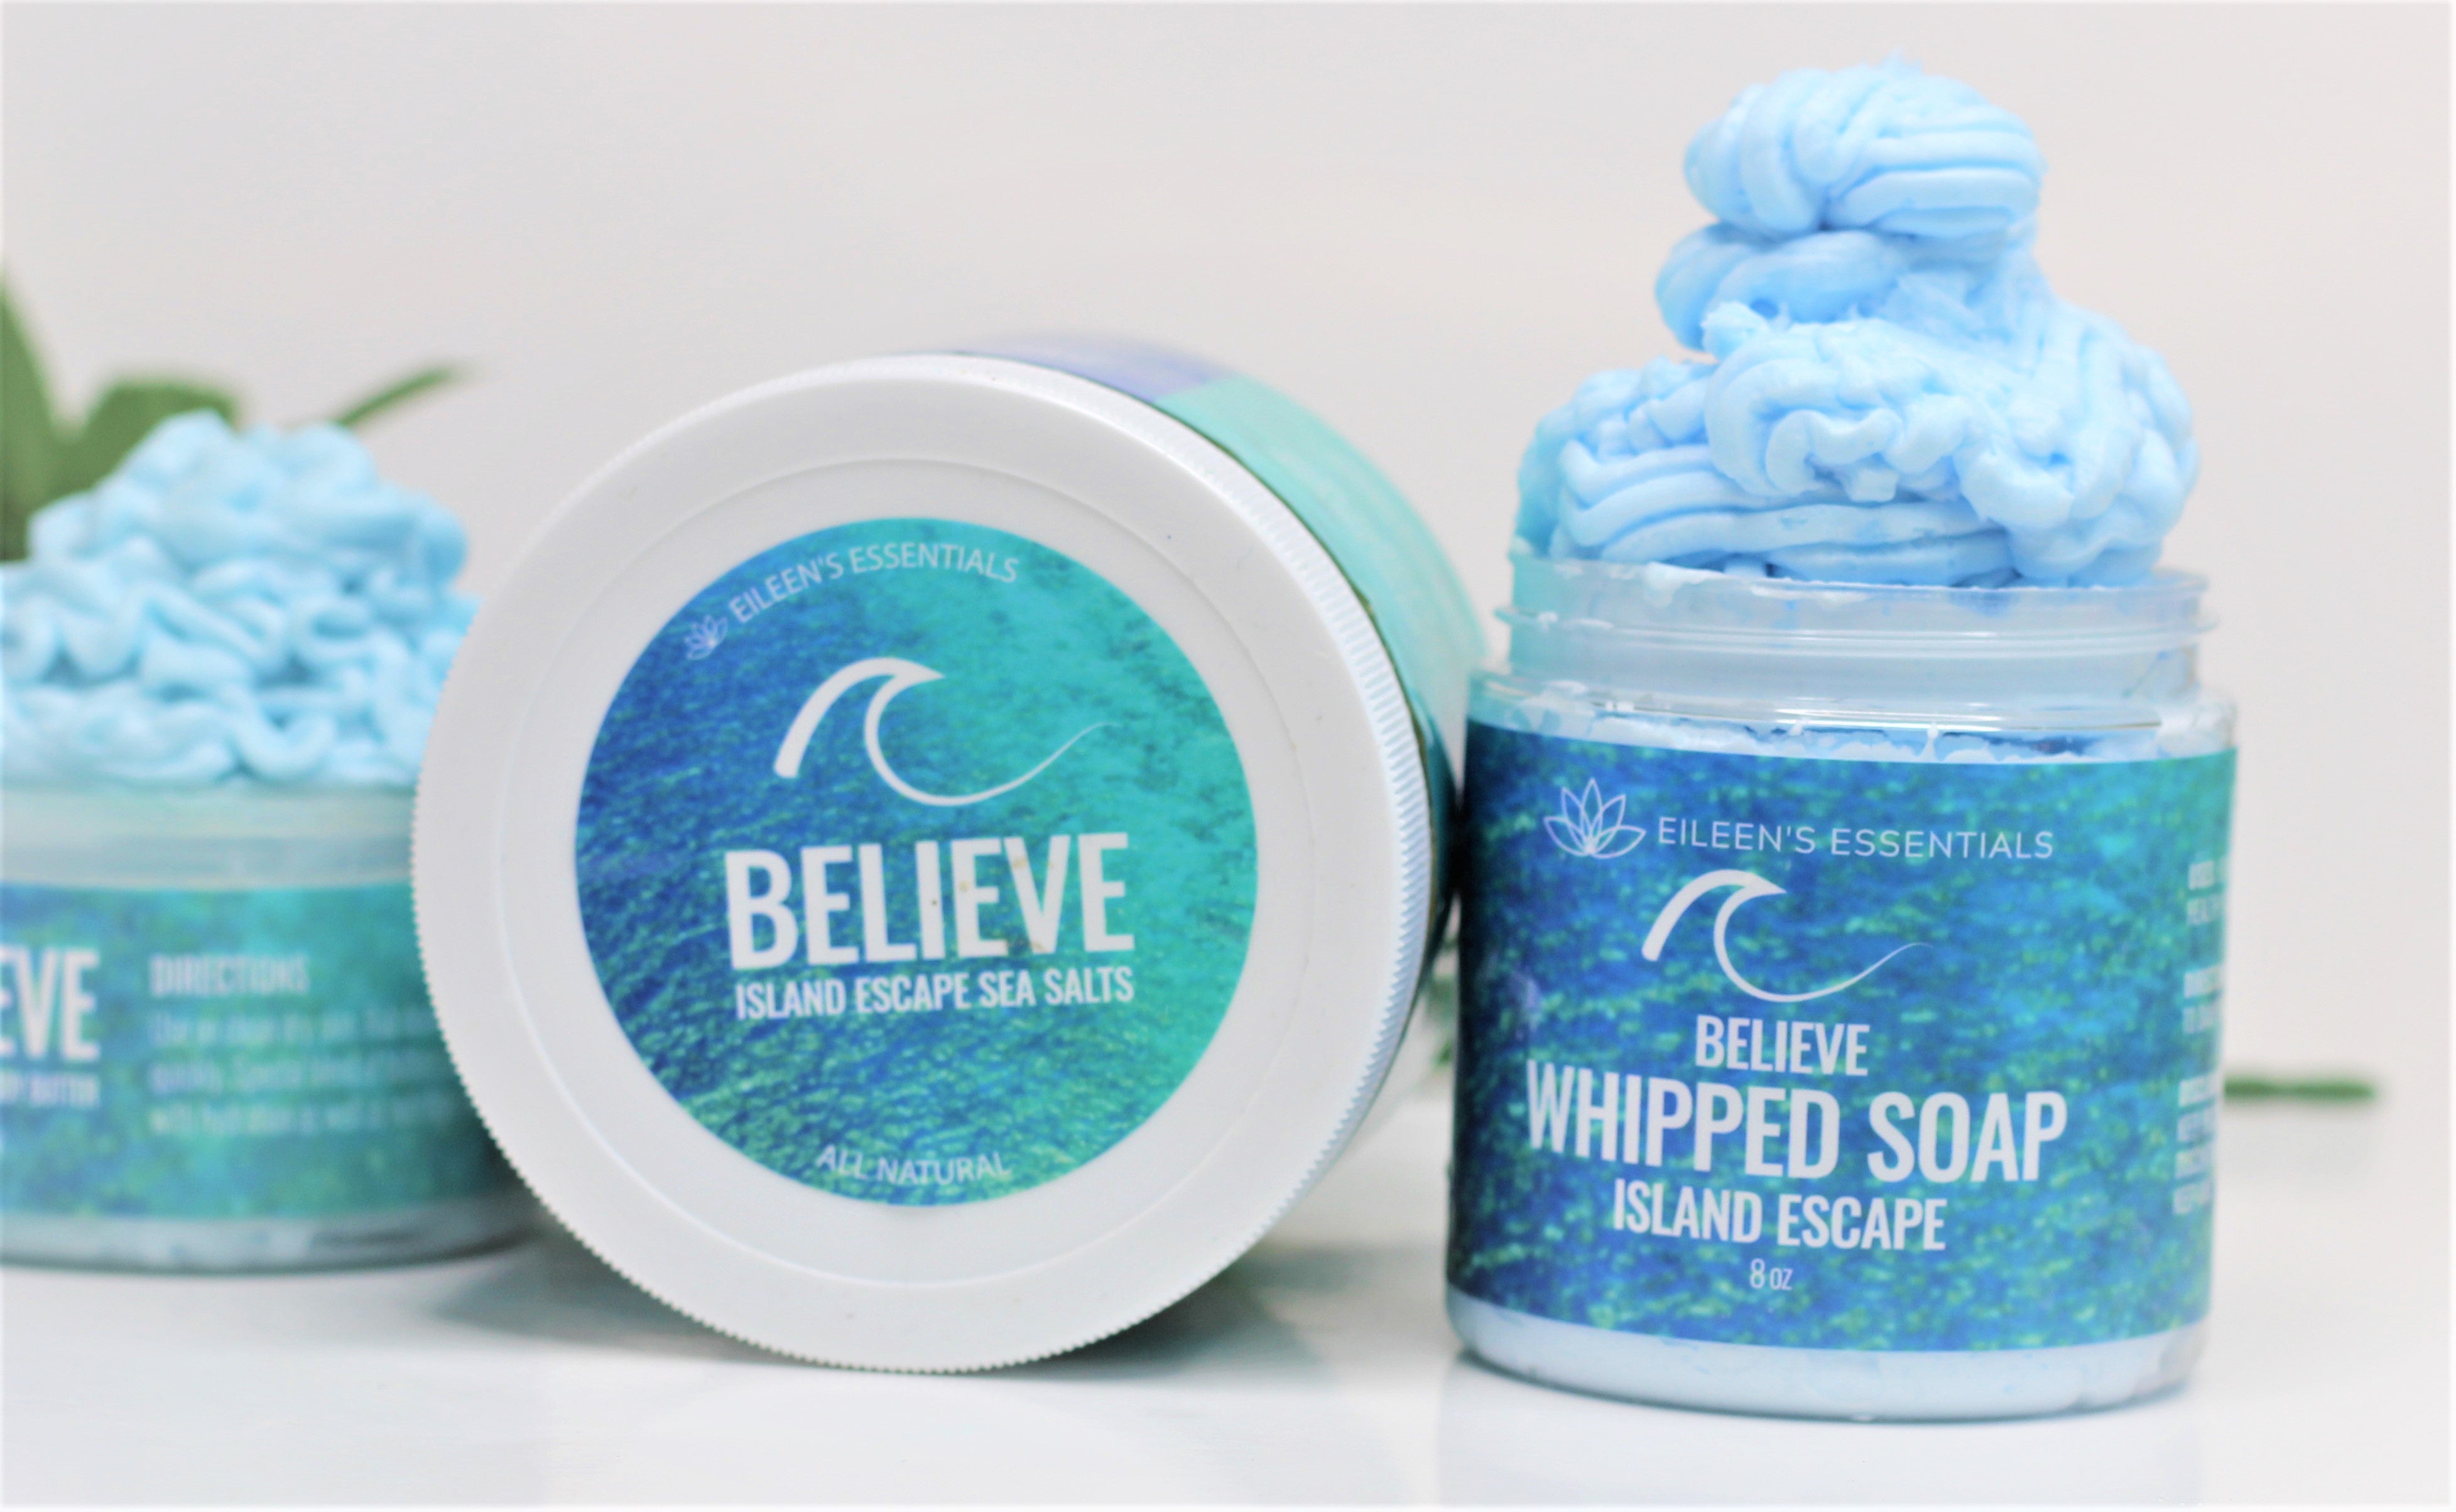 Whipped Soap; BELIEVE (Island Escapes)